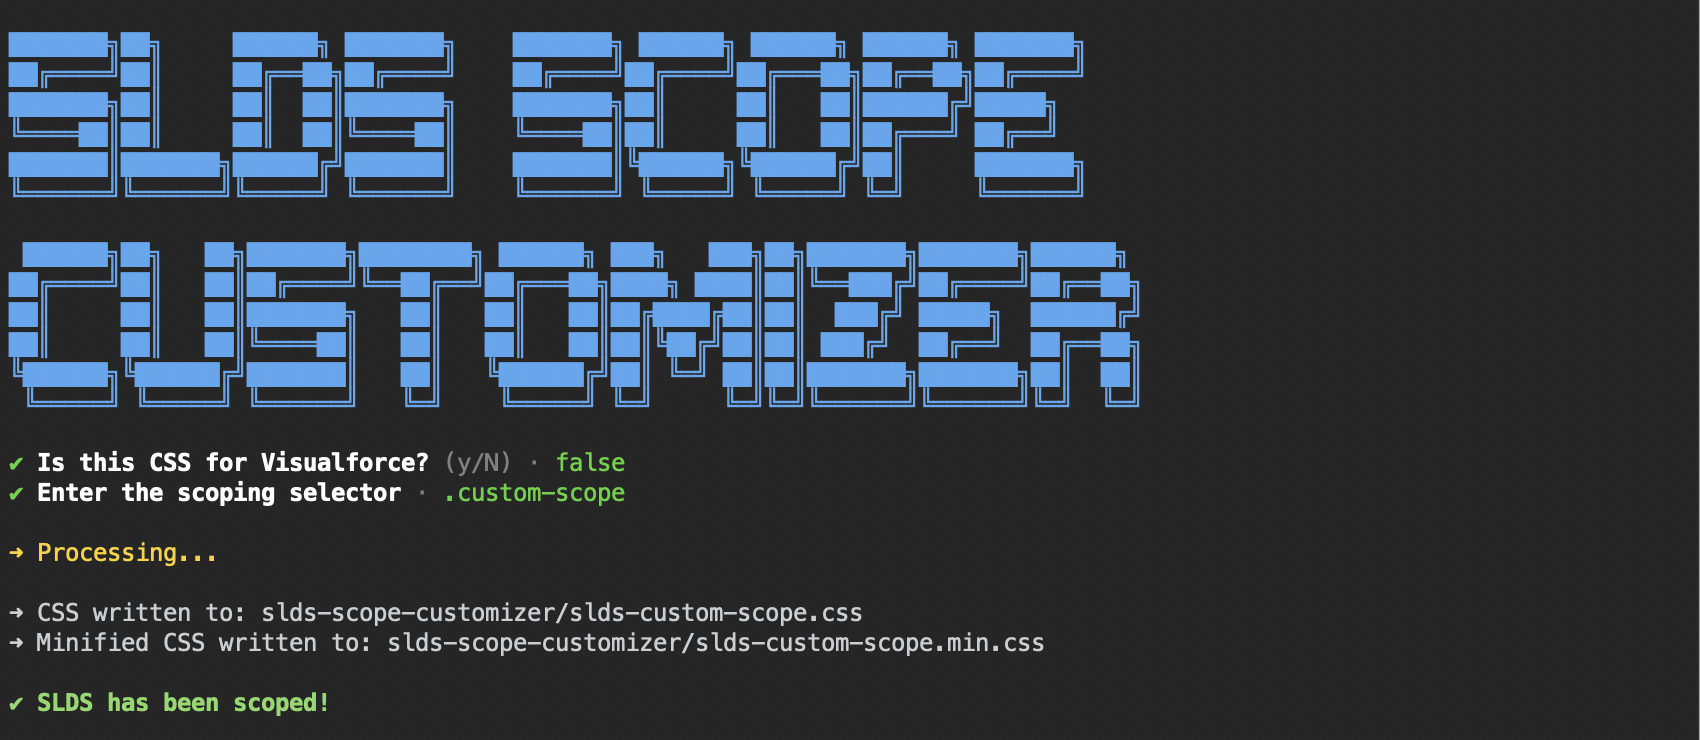 Command line screenshot after responding to the prompts